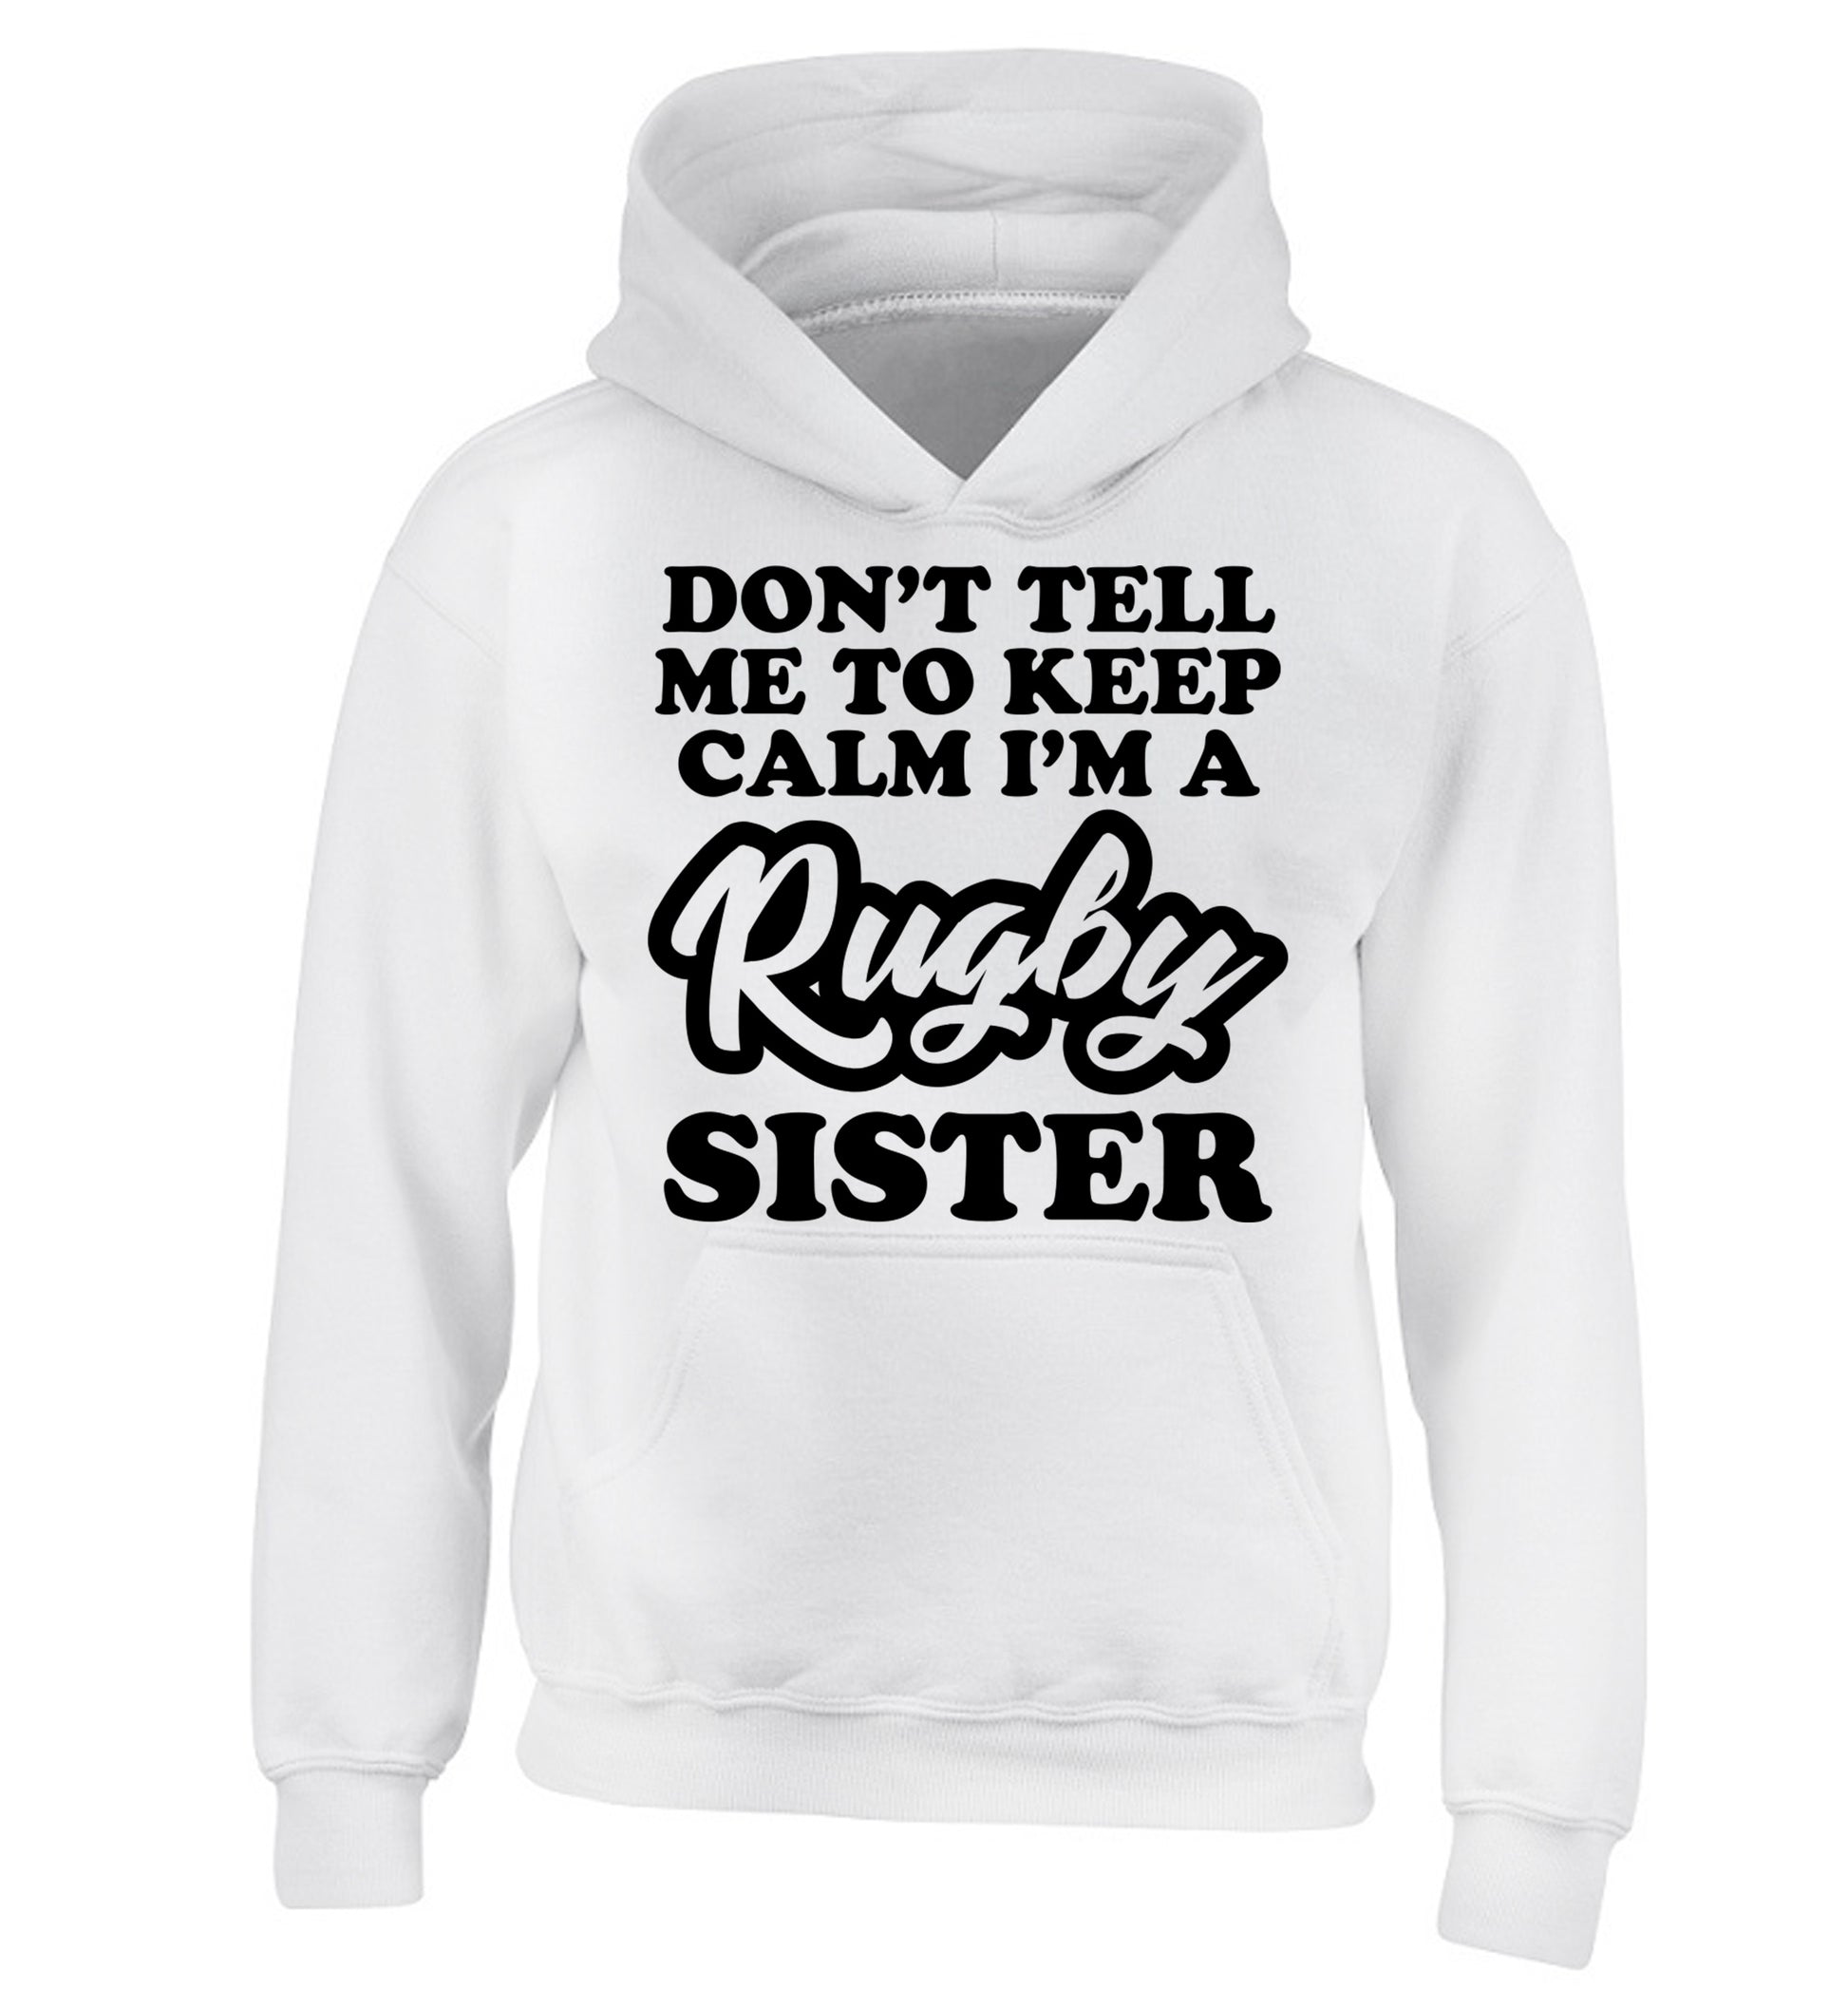 Don't tell me keep calm I'm a rugby sister children's white hoodie 12-13 Years